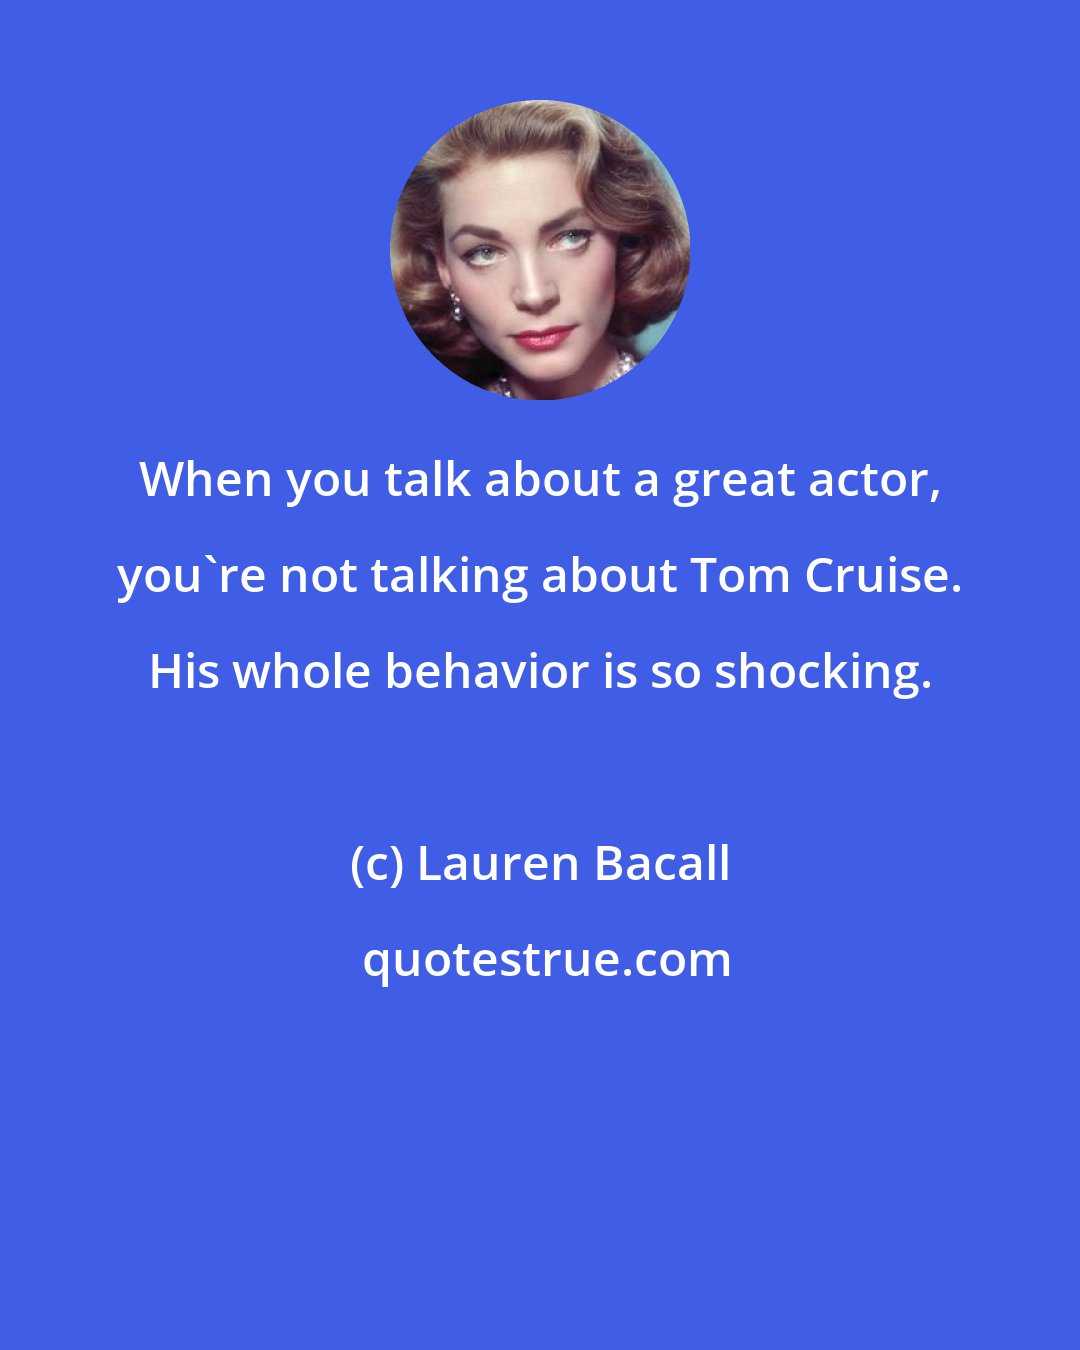 Lauren Bacall: When you talk about a great actor, you're not talking about Tom Cruise. His whole behavior is so shocking.